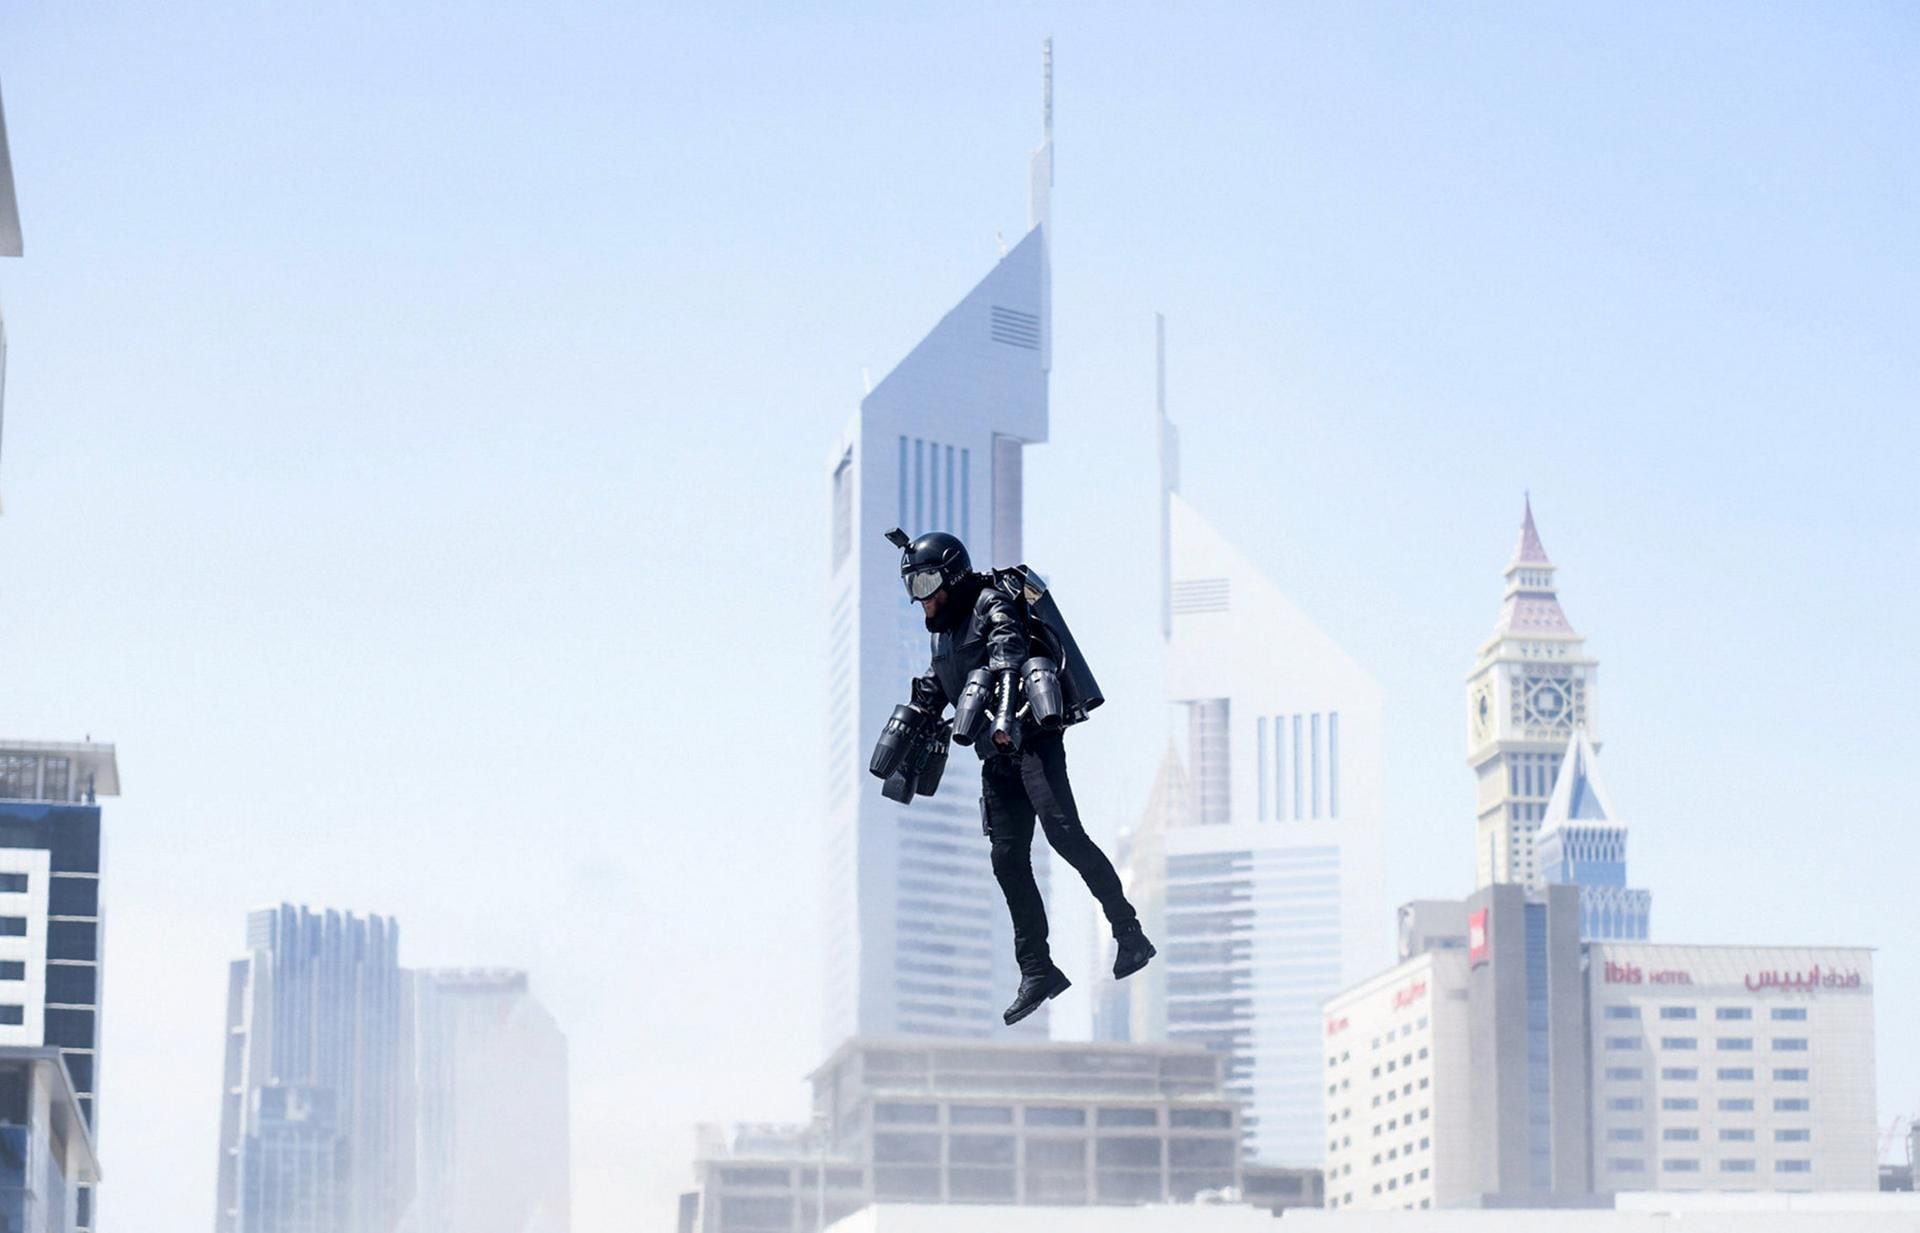 Watch Two Men With Jetpacks Fly Over Tallest Building In Dubai 